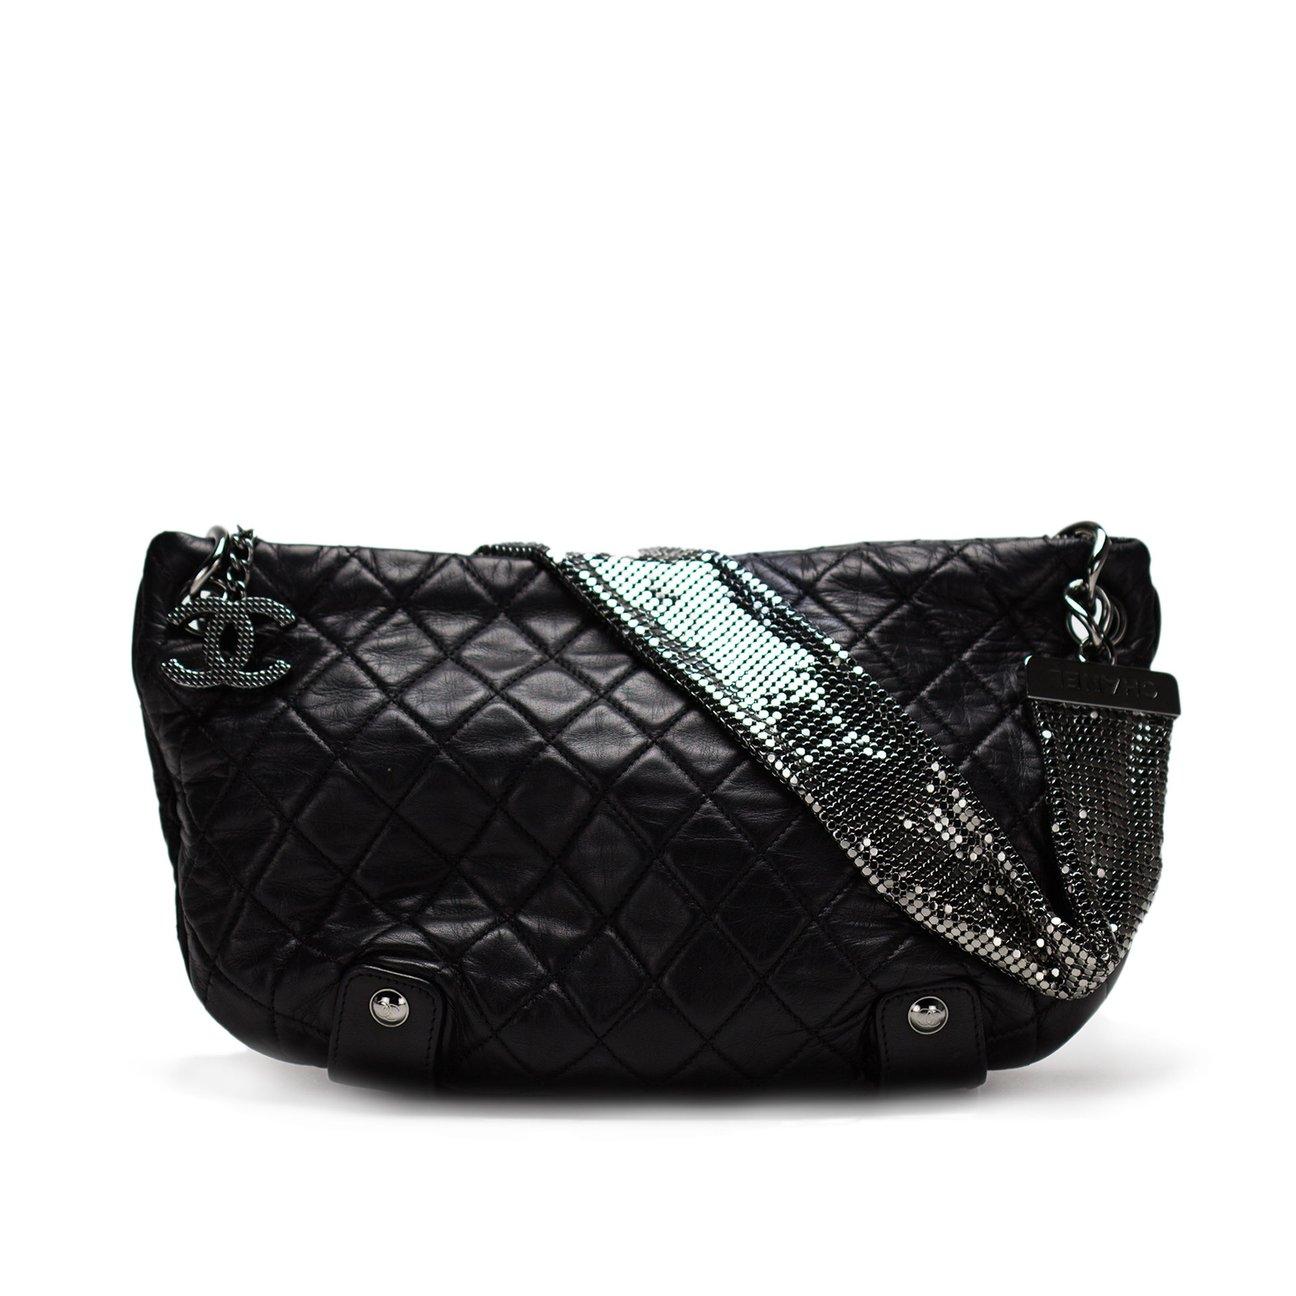 Chanel 2008 Rare Metallic Mesh Quilted Soft Quilted Lambskin Small Hobo Bag  For Sale 1